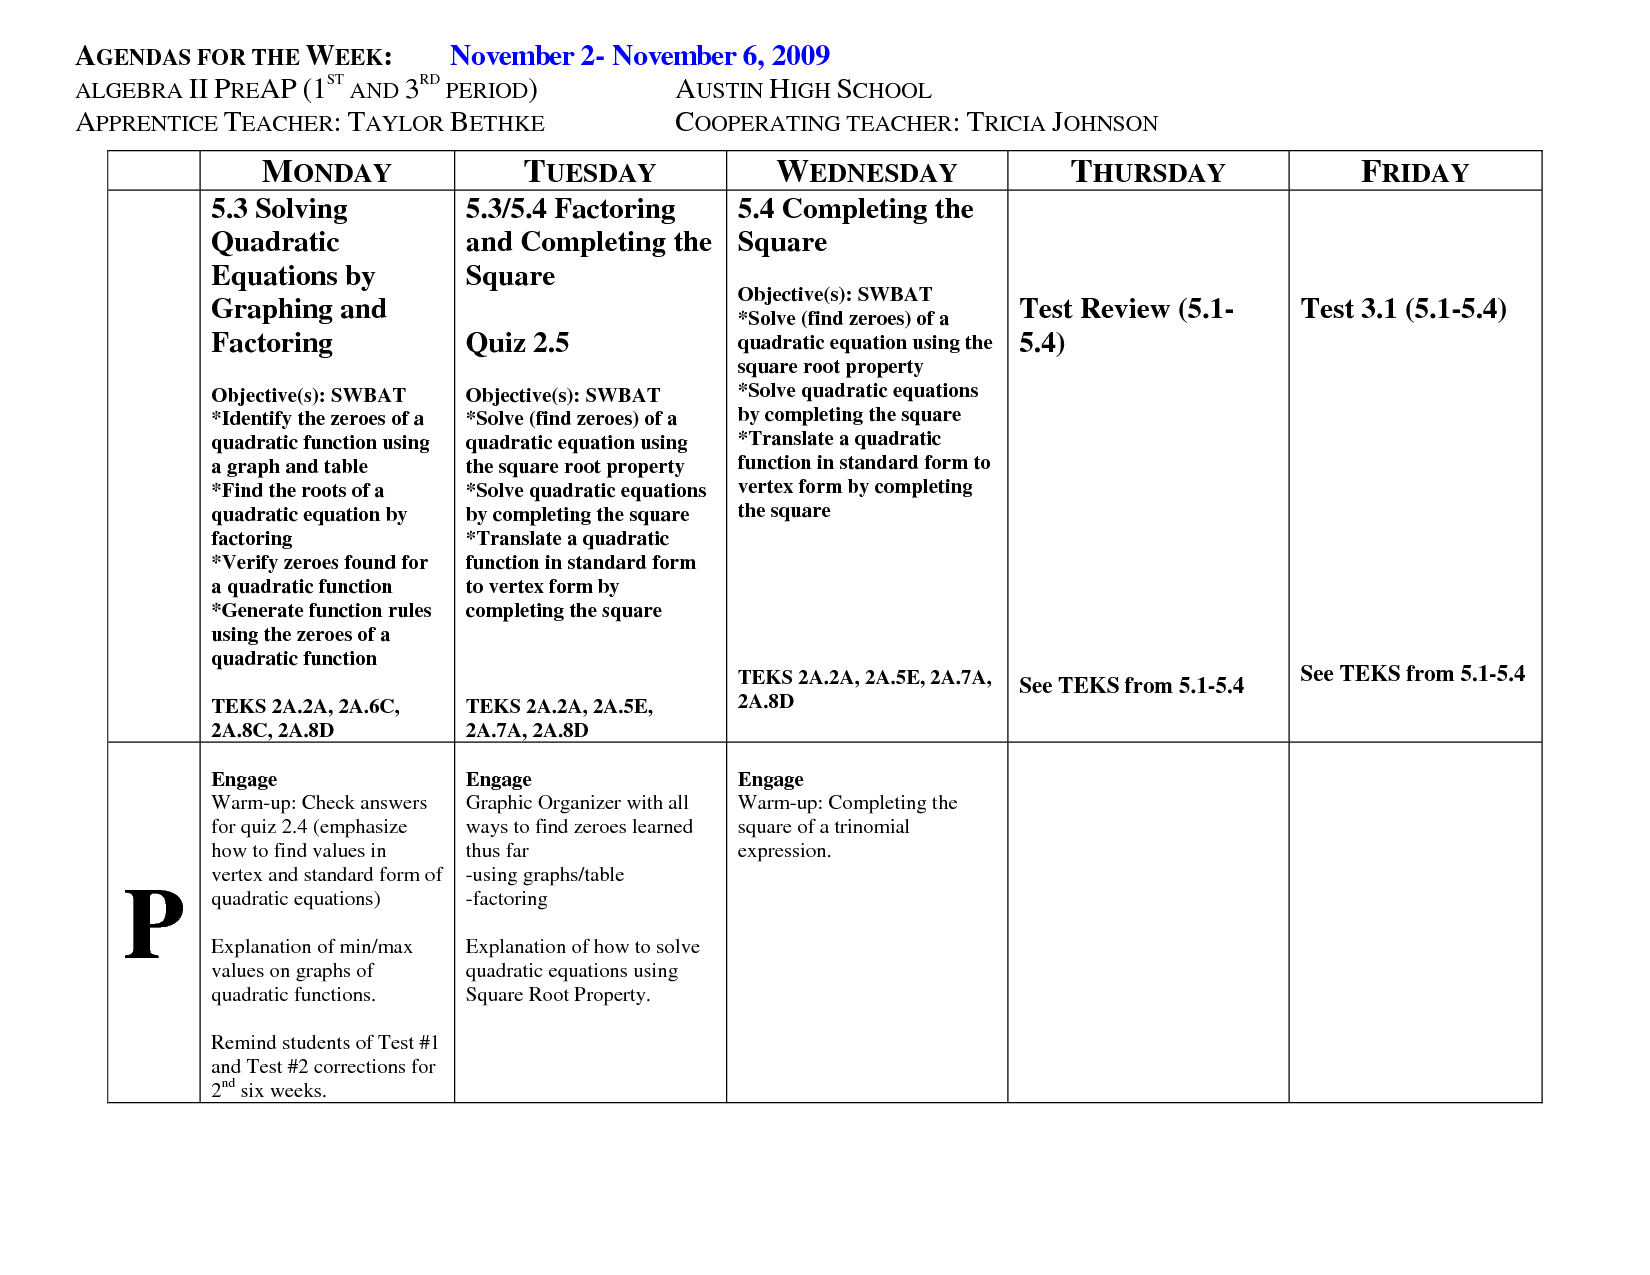 identifying-strengths-and-weaknesses-worksheet